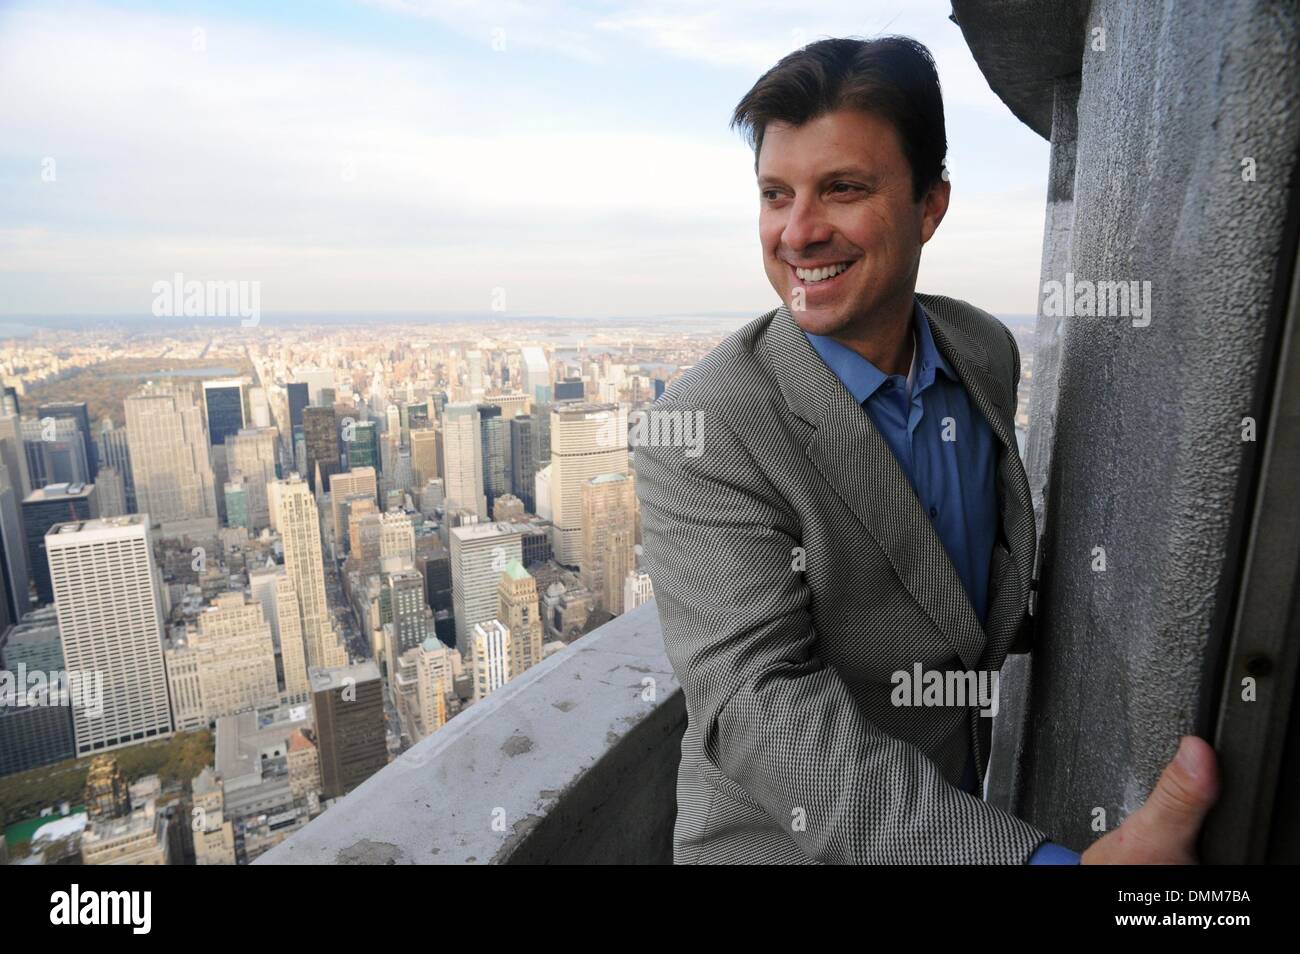 Nov 04, 2009 - Manhattan, New York, USA - New York Yankee great and four-time World Series champion TINO MARTINEZ, looking from the 103rd floor parapet, lights and tours the Empire State Building to wish the Bronx Bombers good and celebrate the playing of Game 6 against the Philadelphia Phillies at Yankee Stadium tonight.  (Credit Image: Â© Bryan Smith/ZUMA Press) RESTRICTIONS:  *  Stock Photo